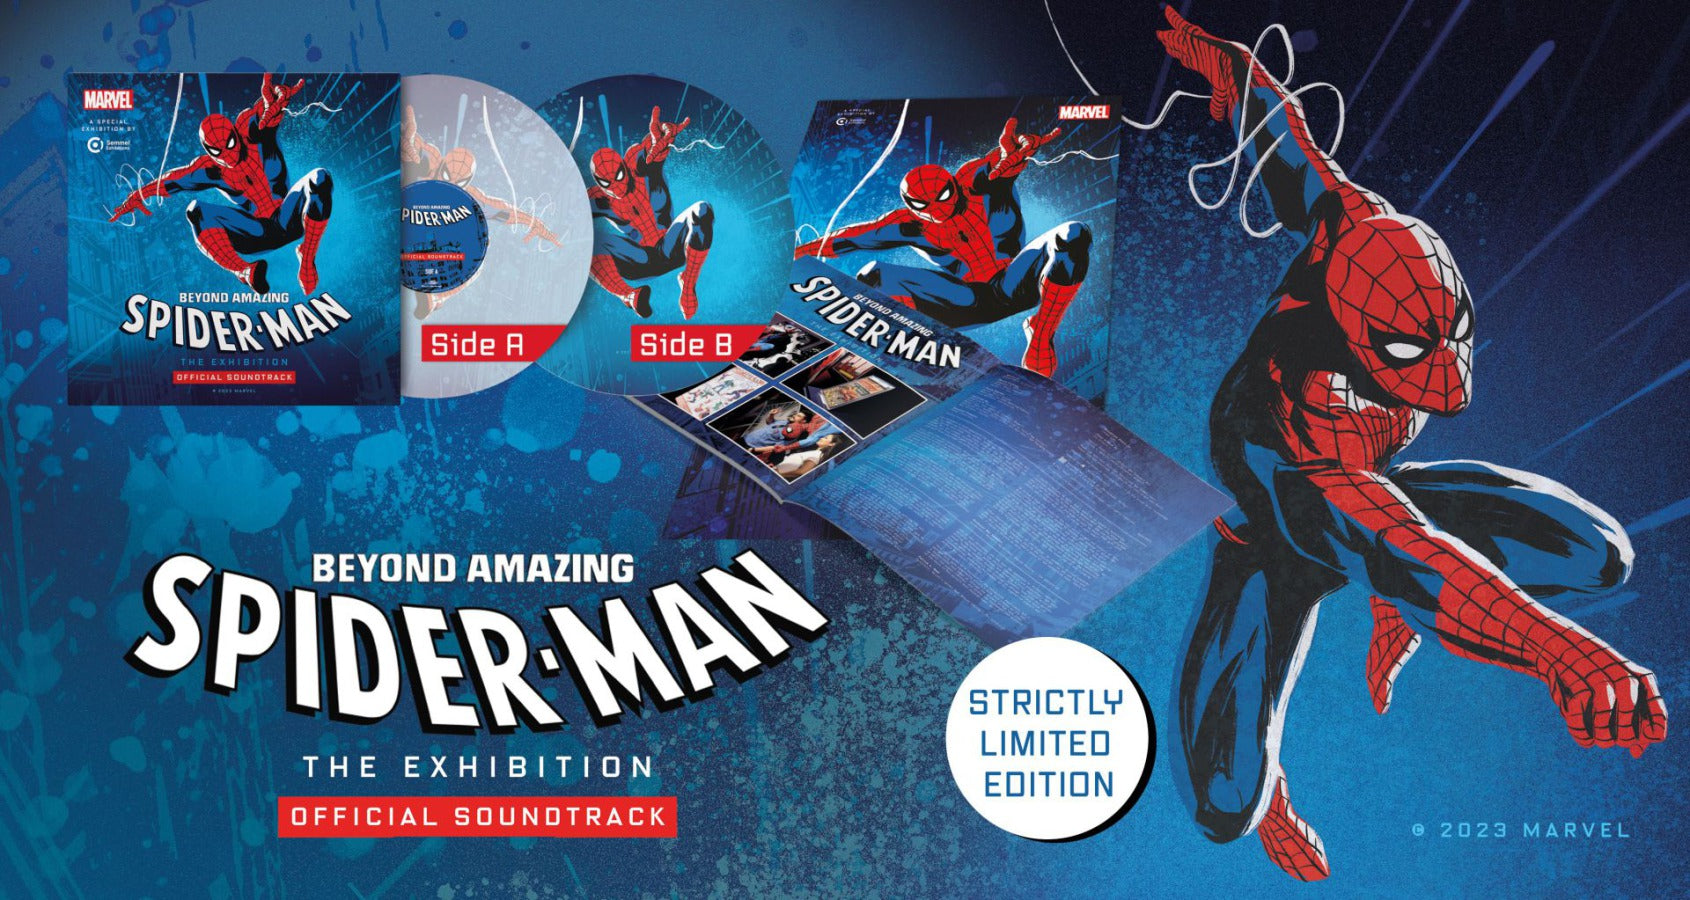 SEBASTIAN M. PURFÜRST - Spider-Man: Beyond Amazing - The Exhibition OST (w/ Poster) - LP - 180g Crystal Clear (Side A) / Picture Print (Side B) Vinyl [OCT 6]